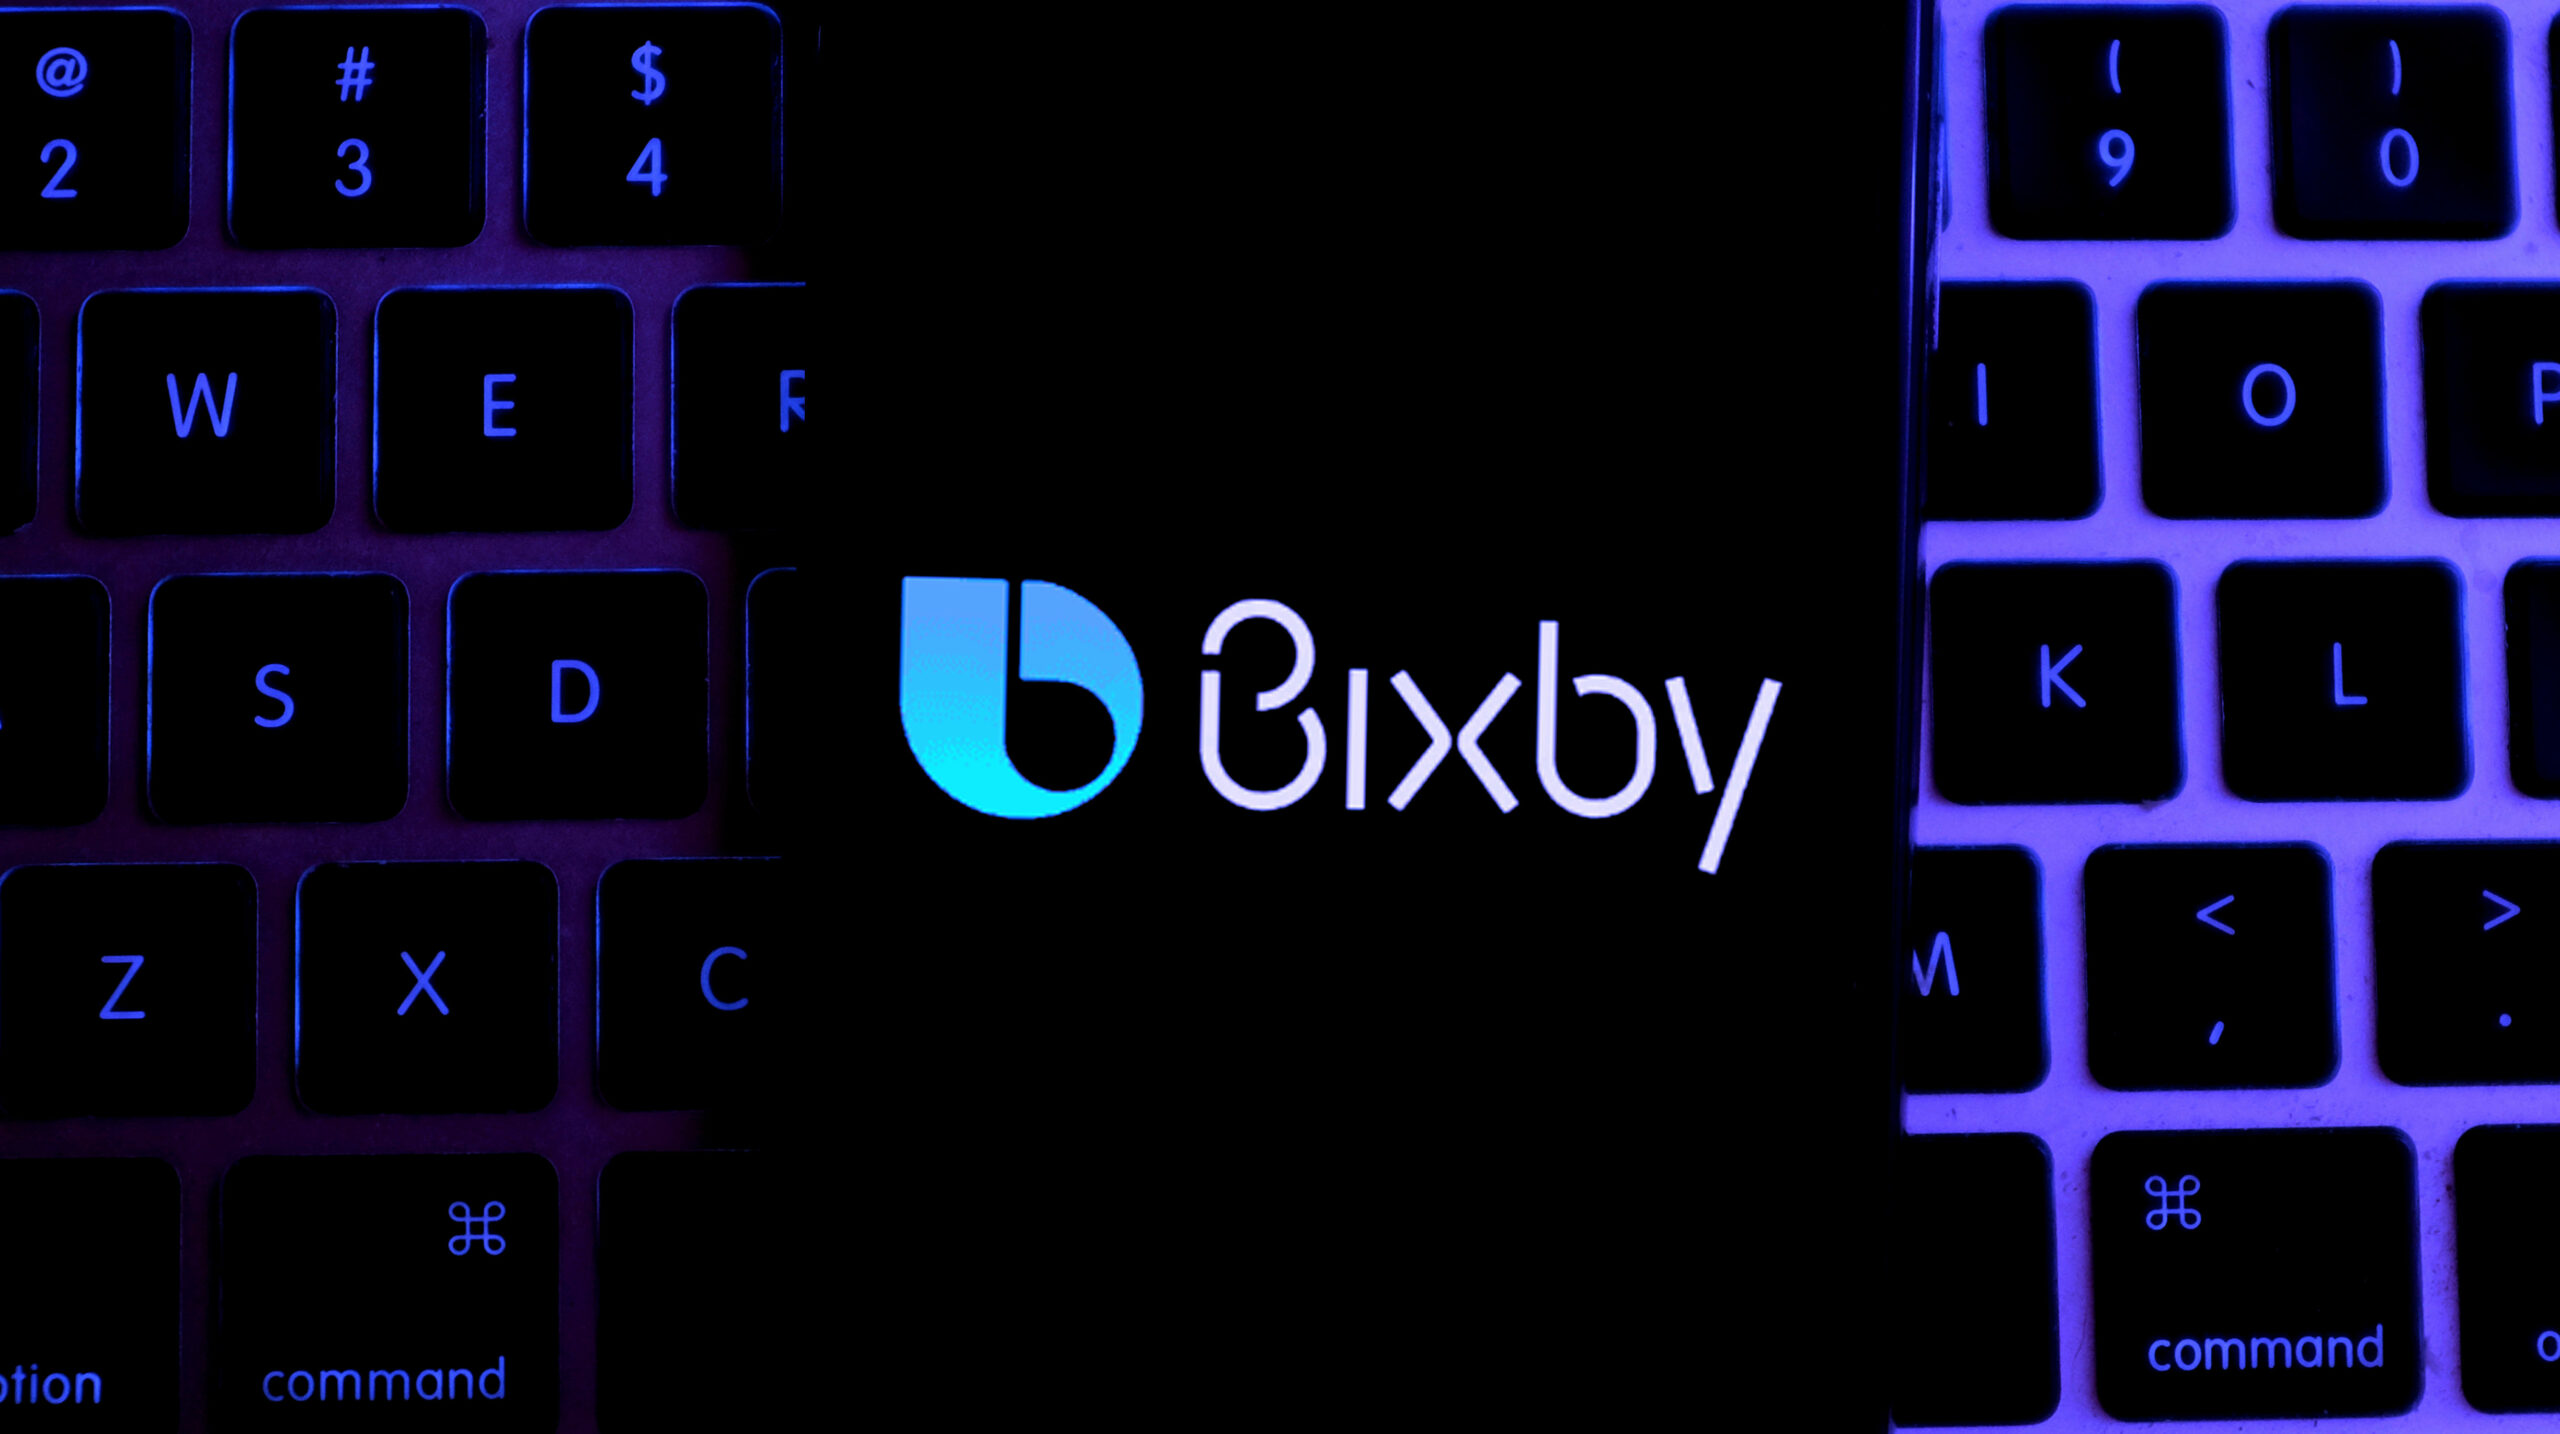 Samsung elevates Bixby with new features like on-device voice processing